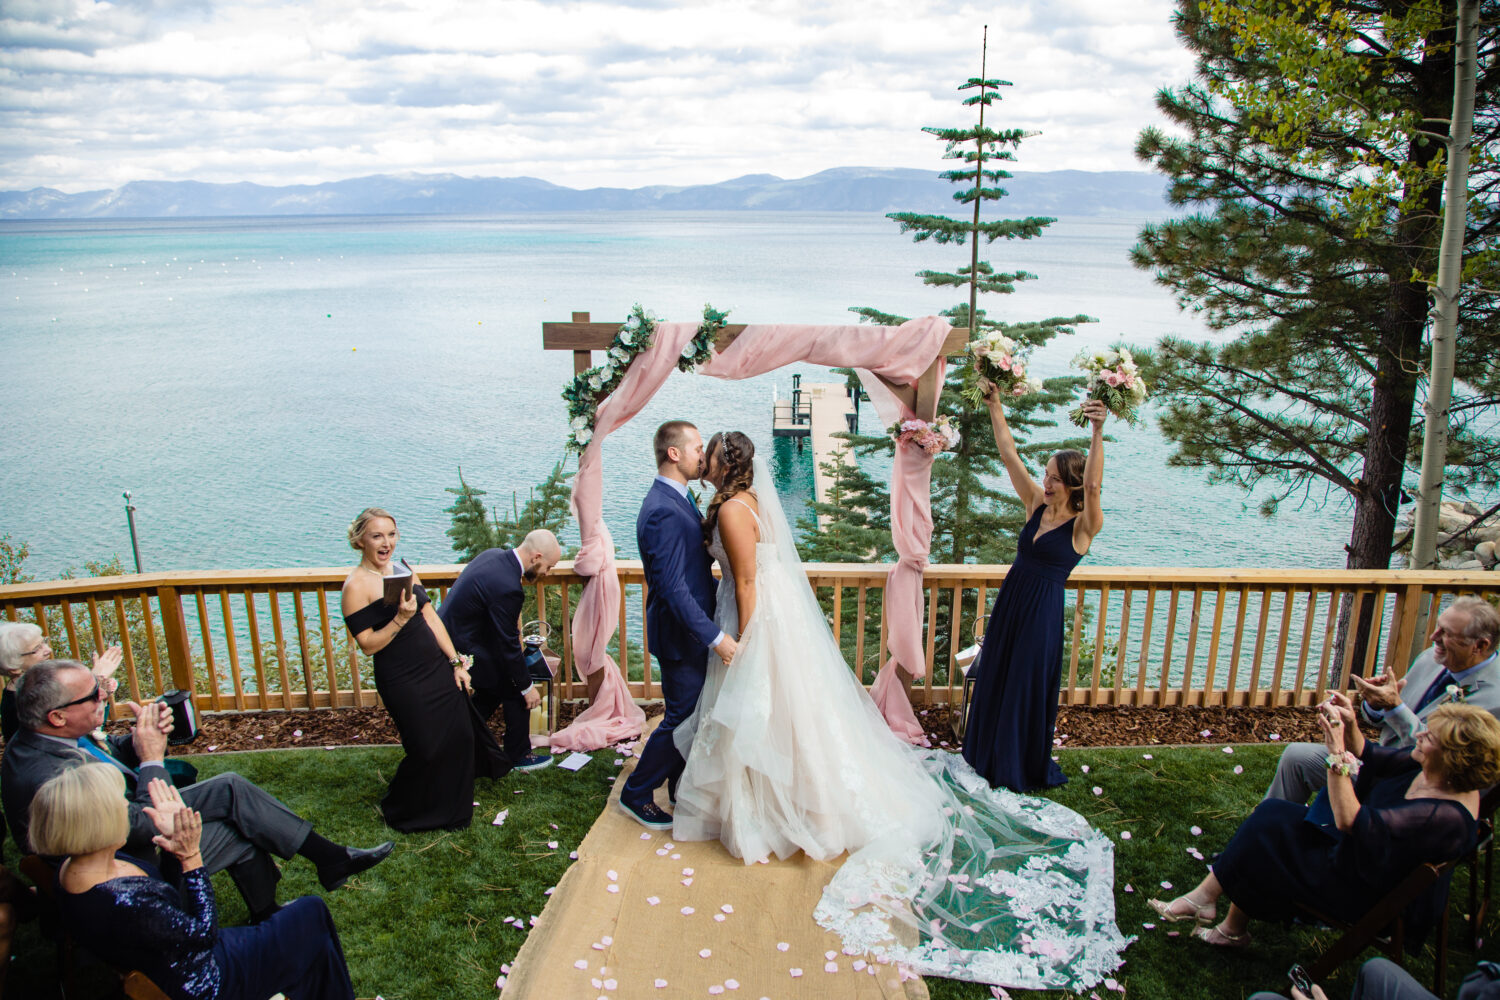 A private backyard wedding with sweeping views of Lake Tahoe.